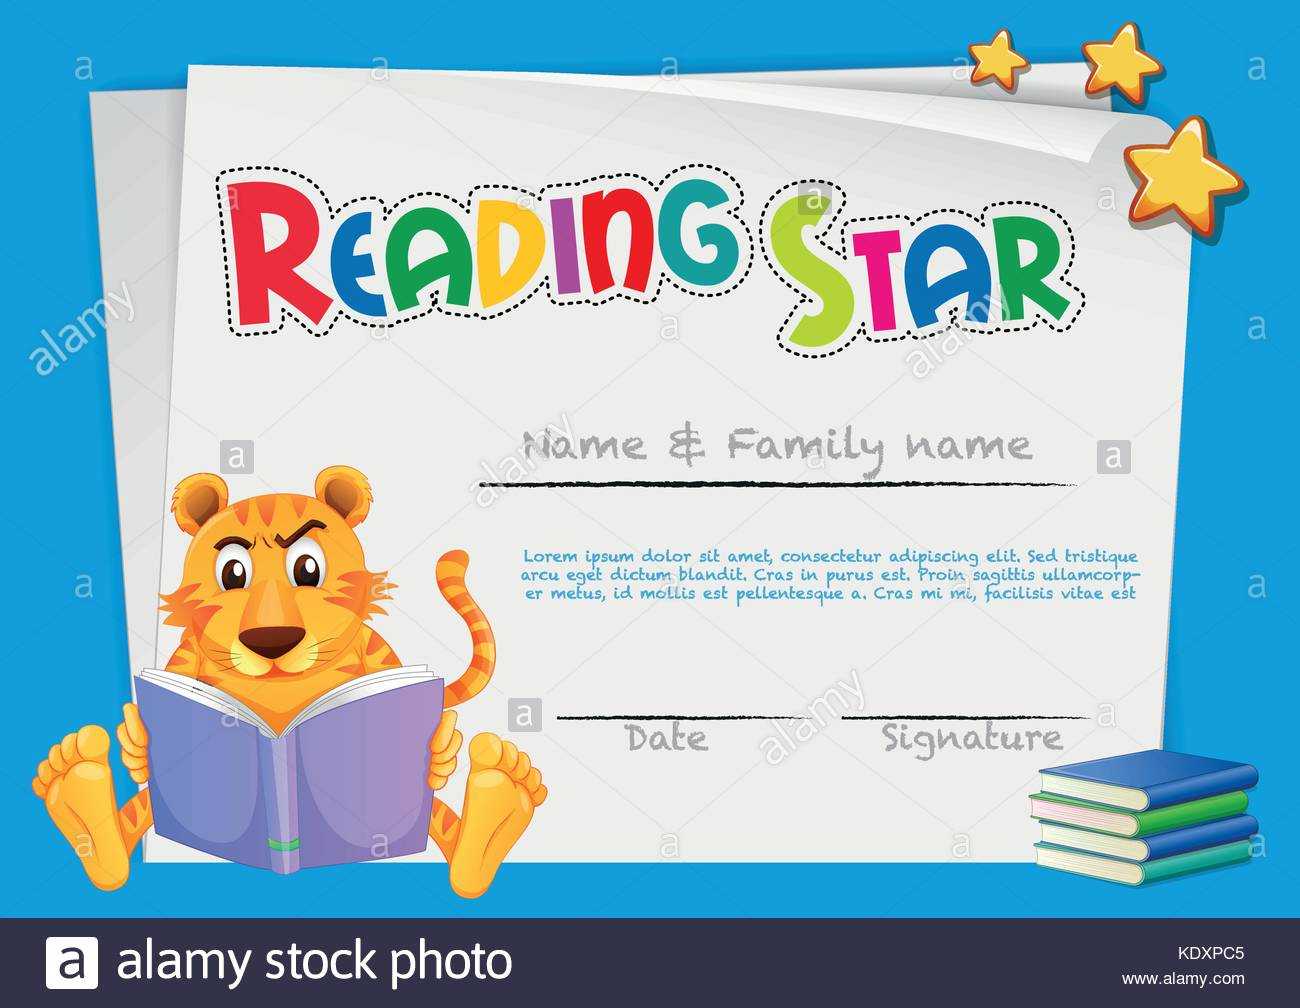 Certificate Template For Reading Award Illustration Stock With Star Award Certificate Template